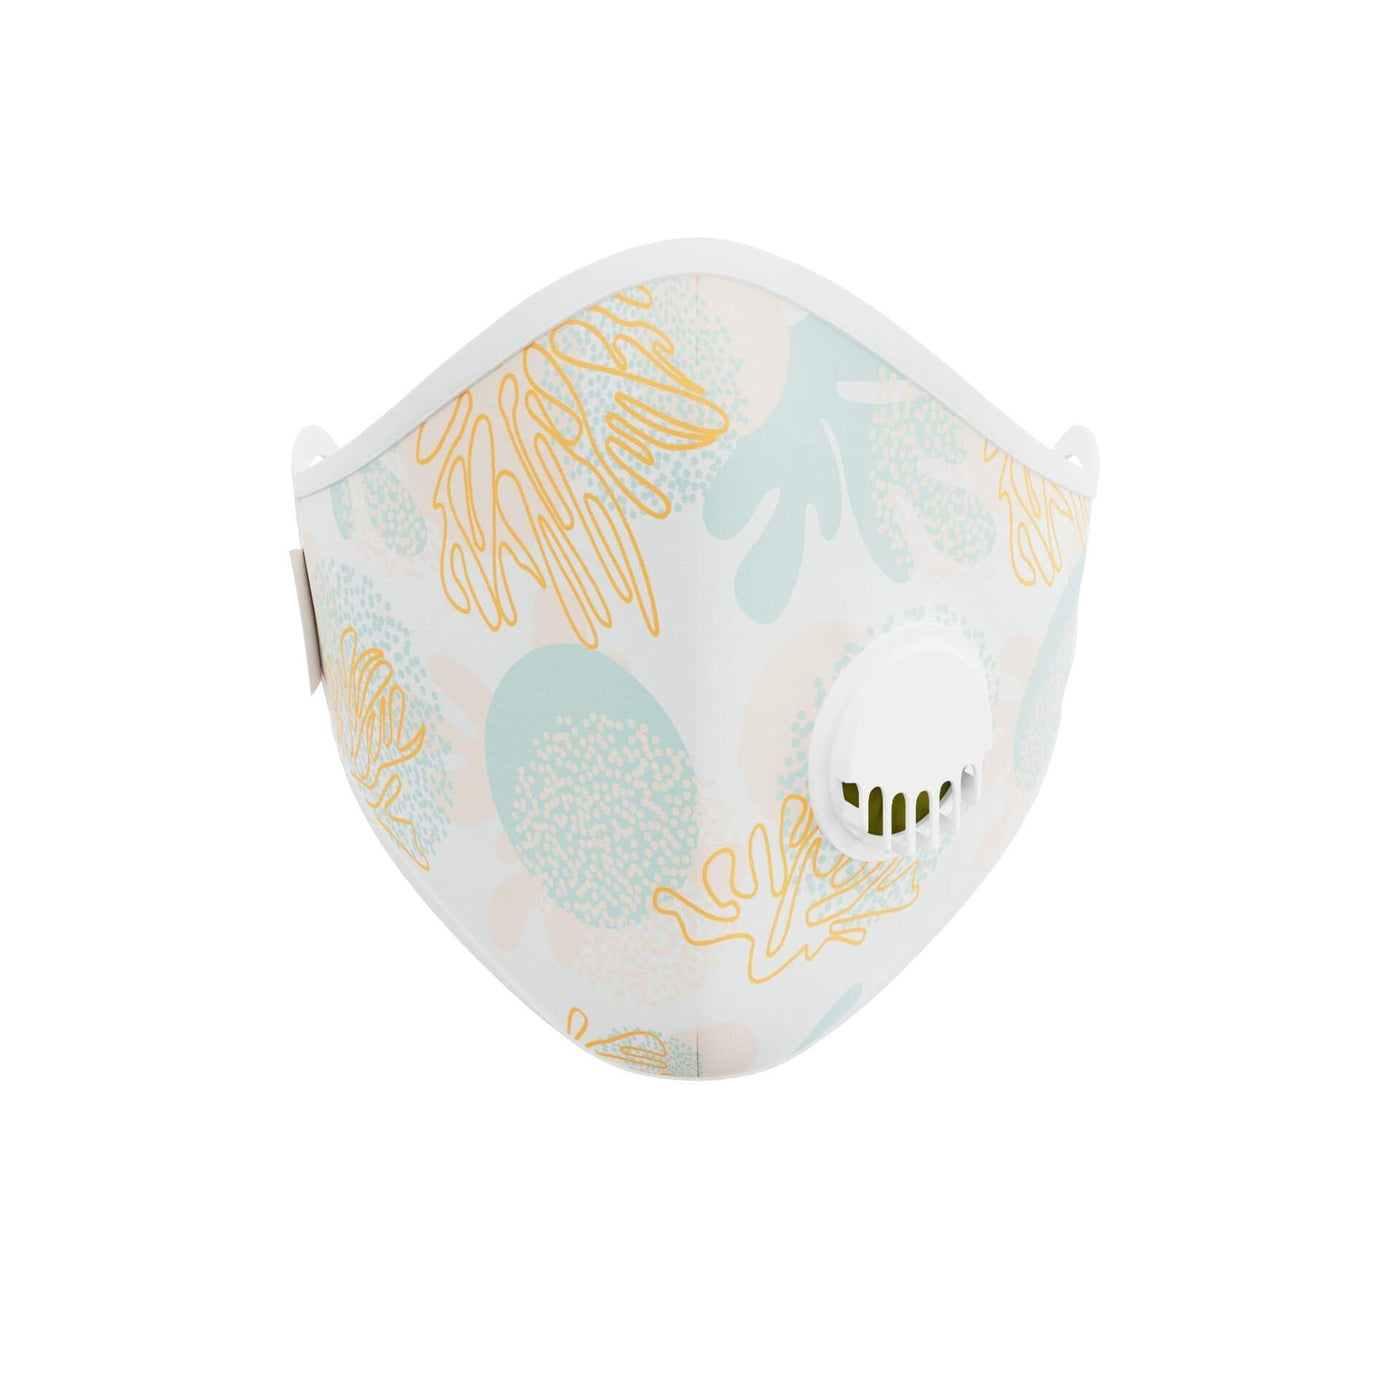 Coral Print Face Mask - The Clothing LoungeWIINO